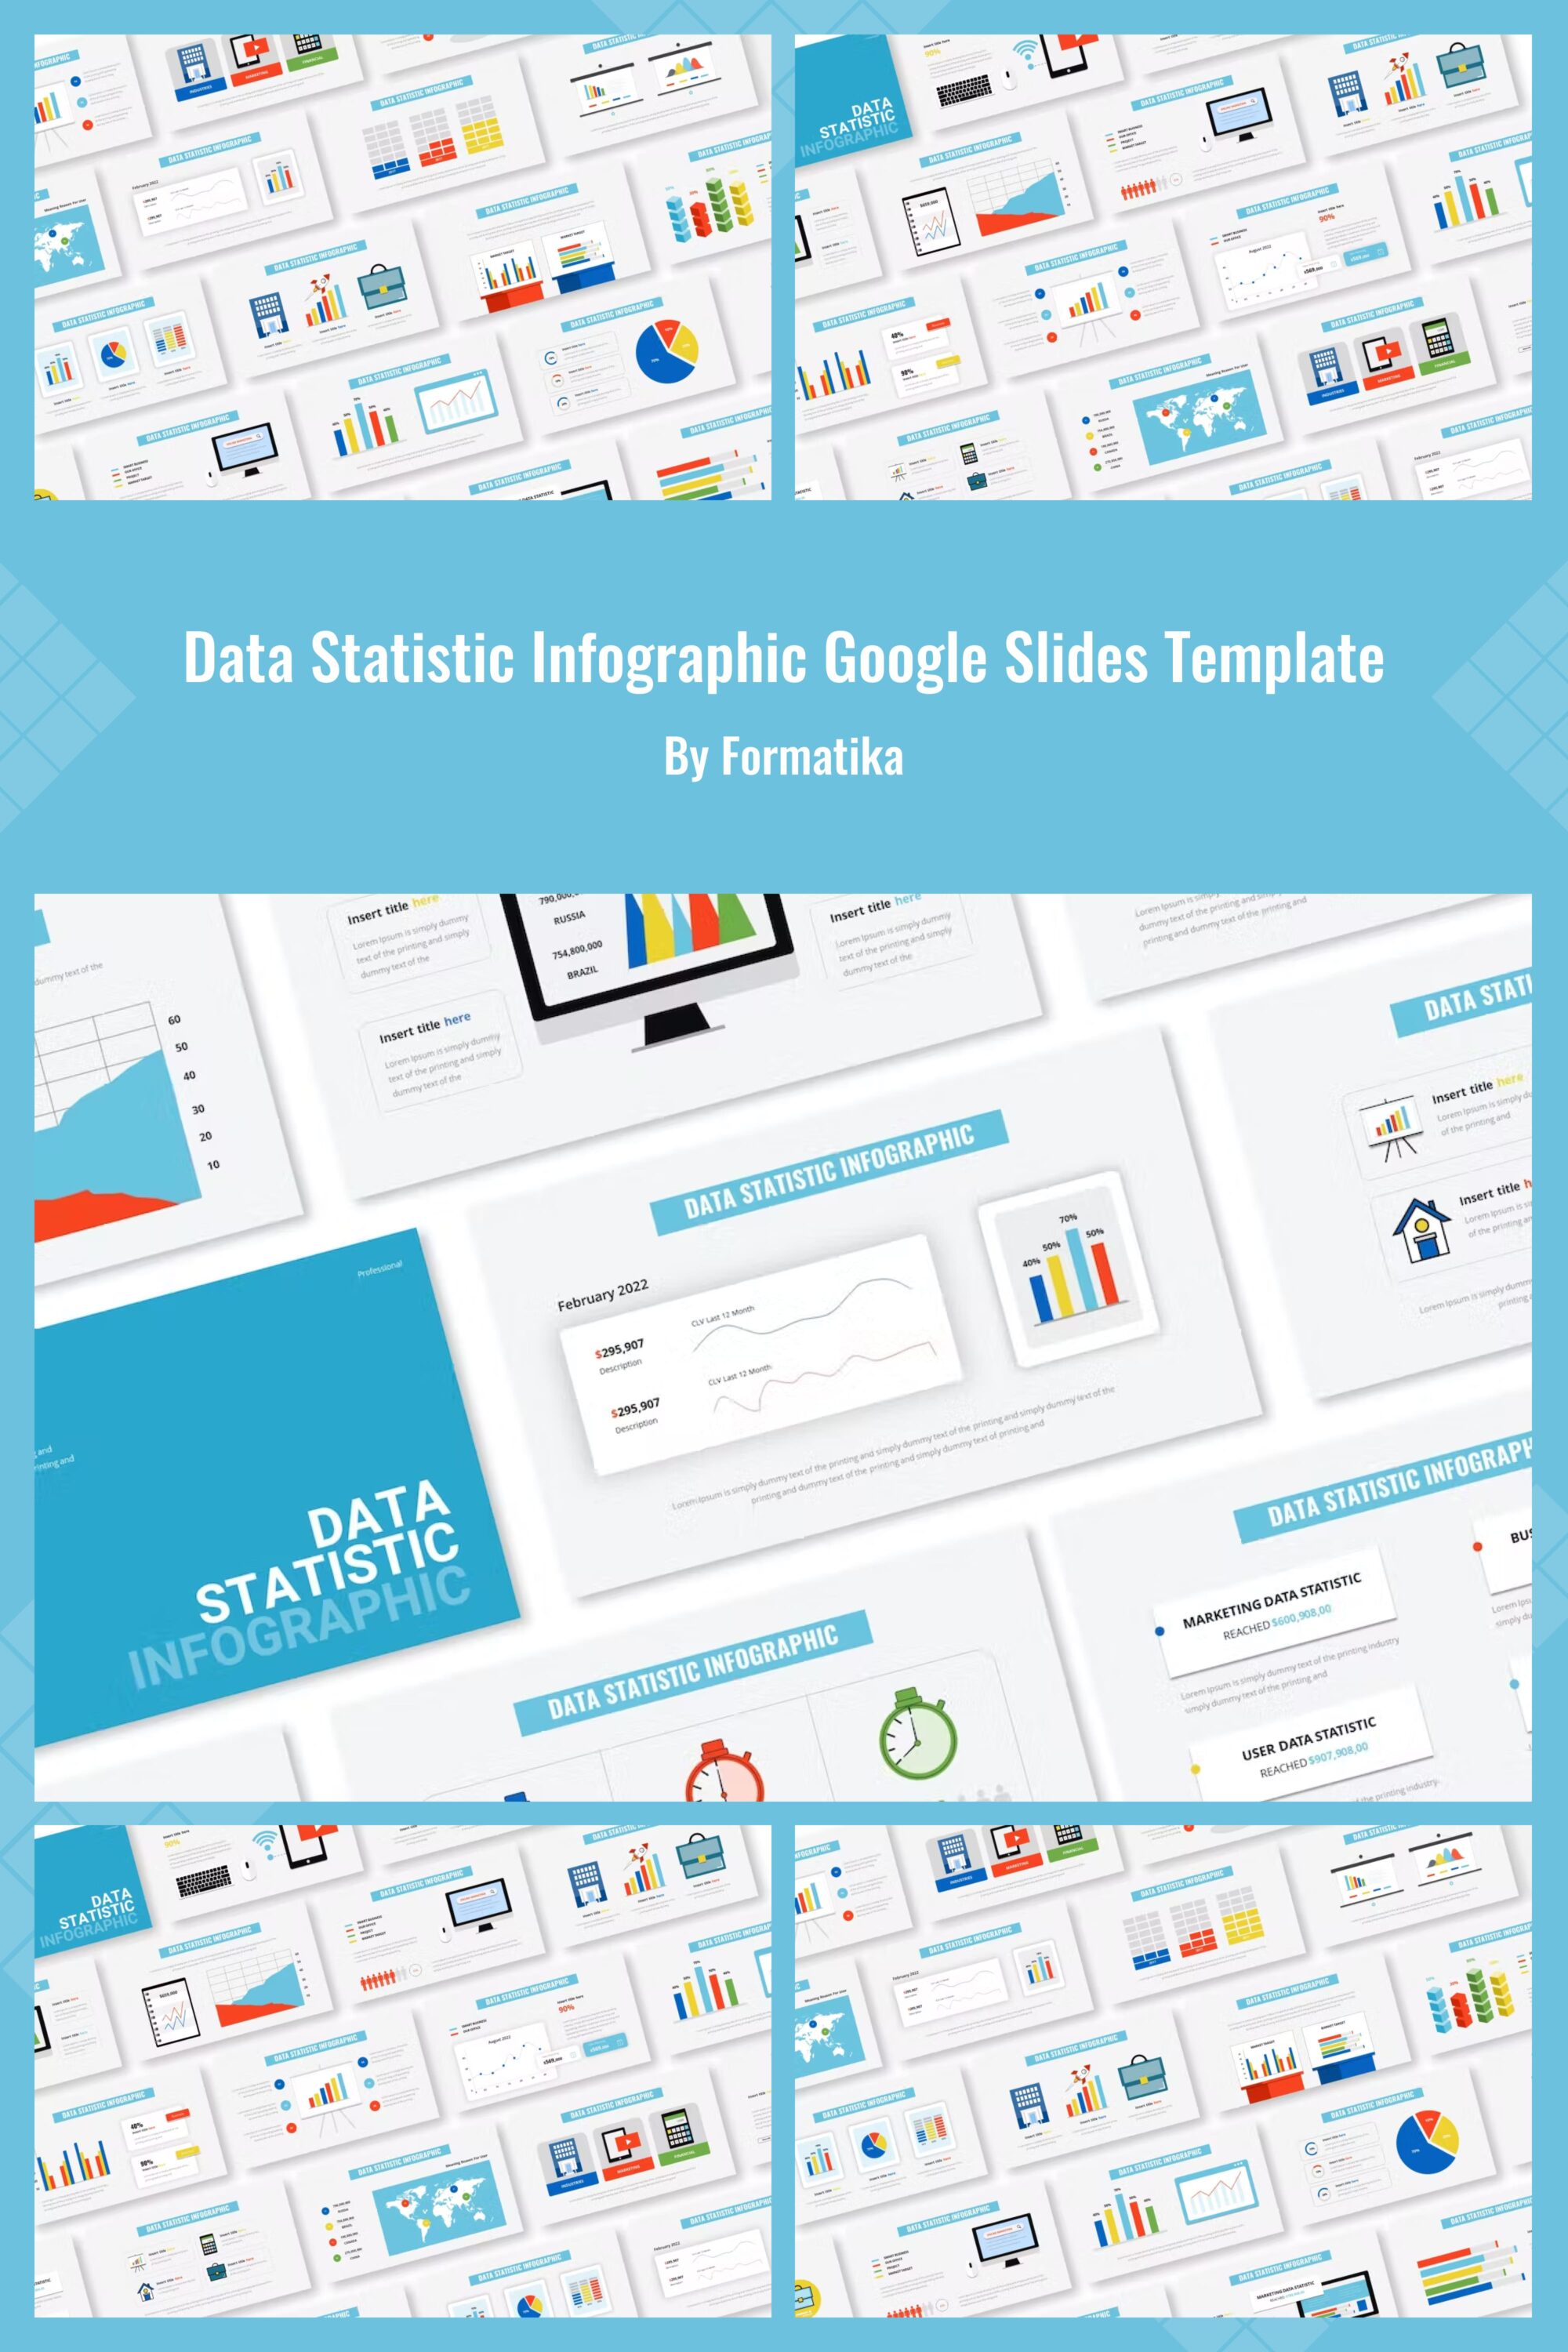 Data Statistic Infographic Google Slides Template - pinterest image preview.